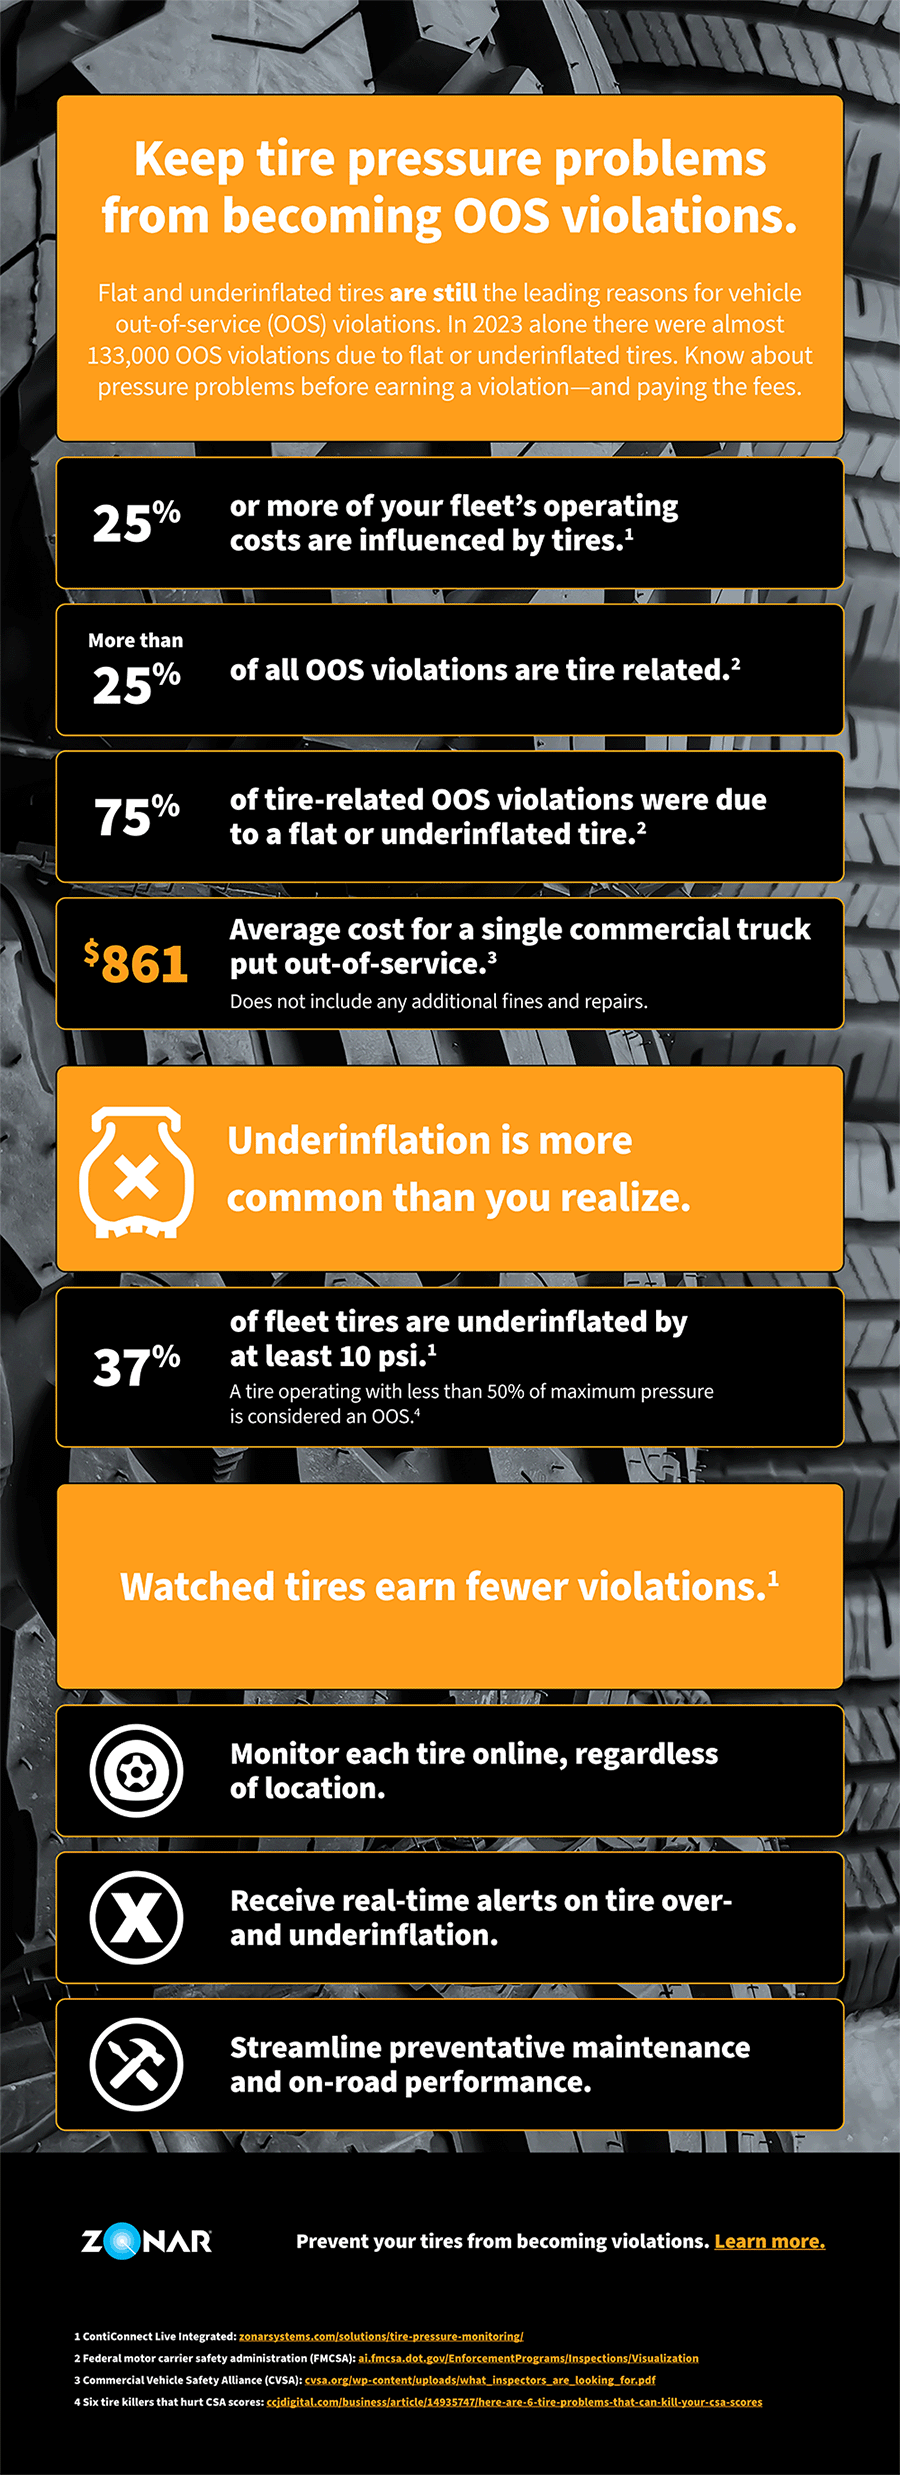 Flat and underinflated tires are the leading reasons for vehicle out-of-service (OOS) violations.